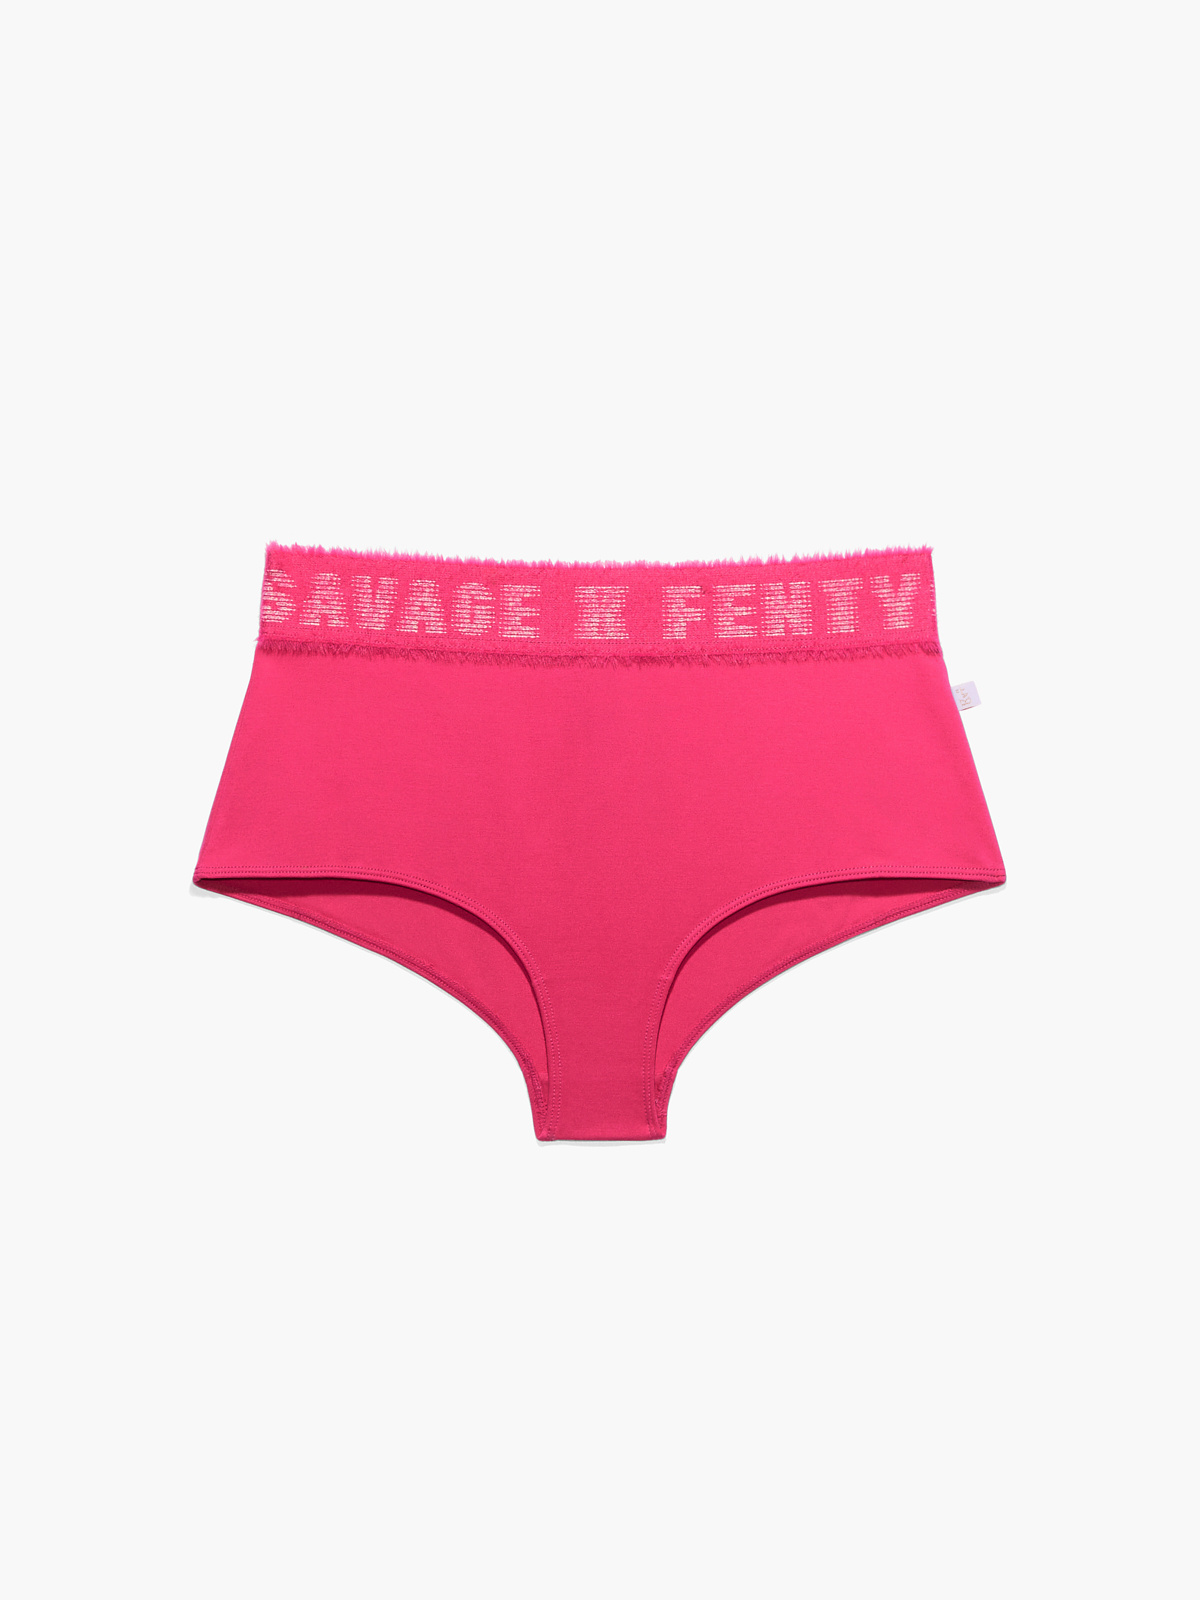 CLF Forever Savage Cheeky Booty Shorts in Pink